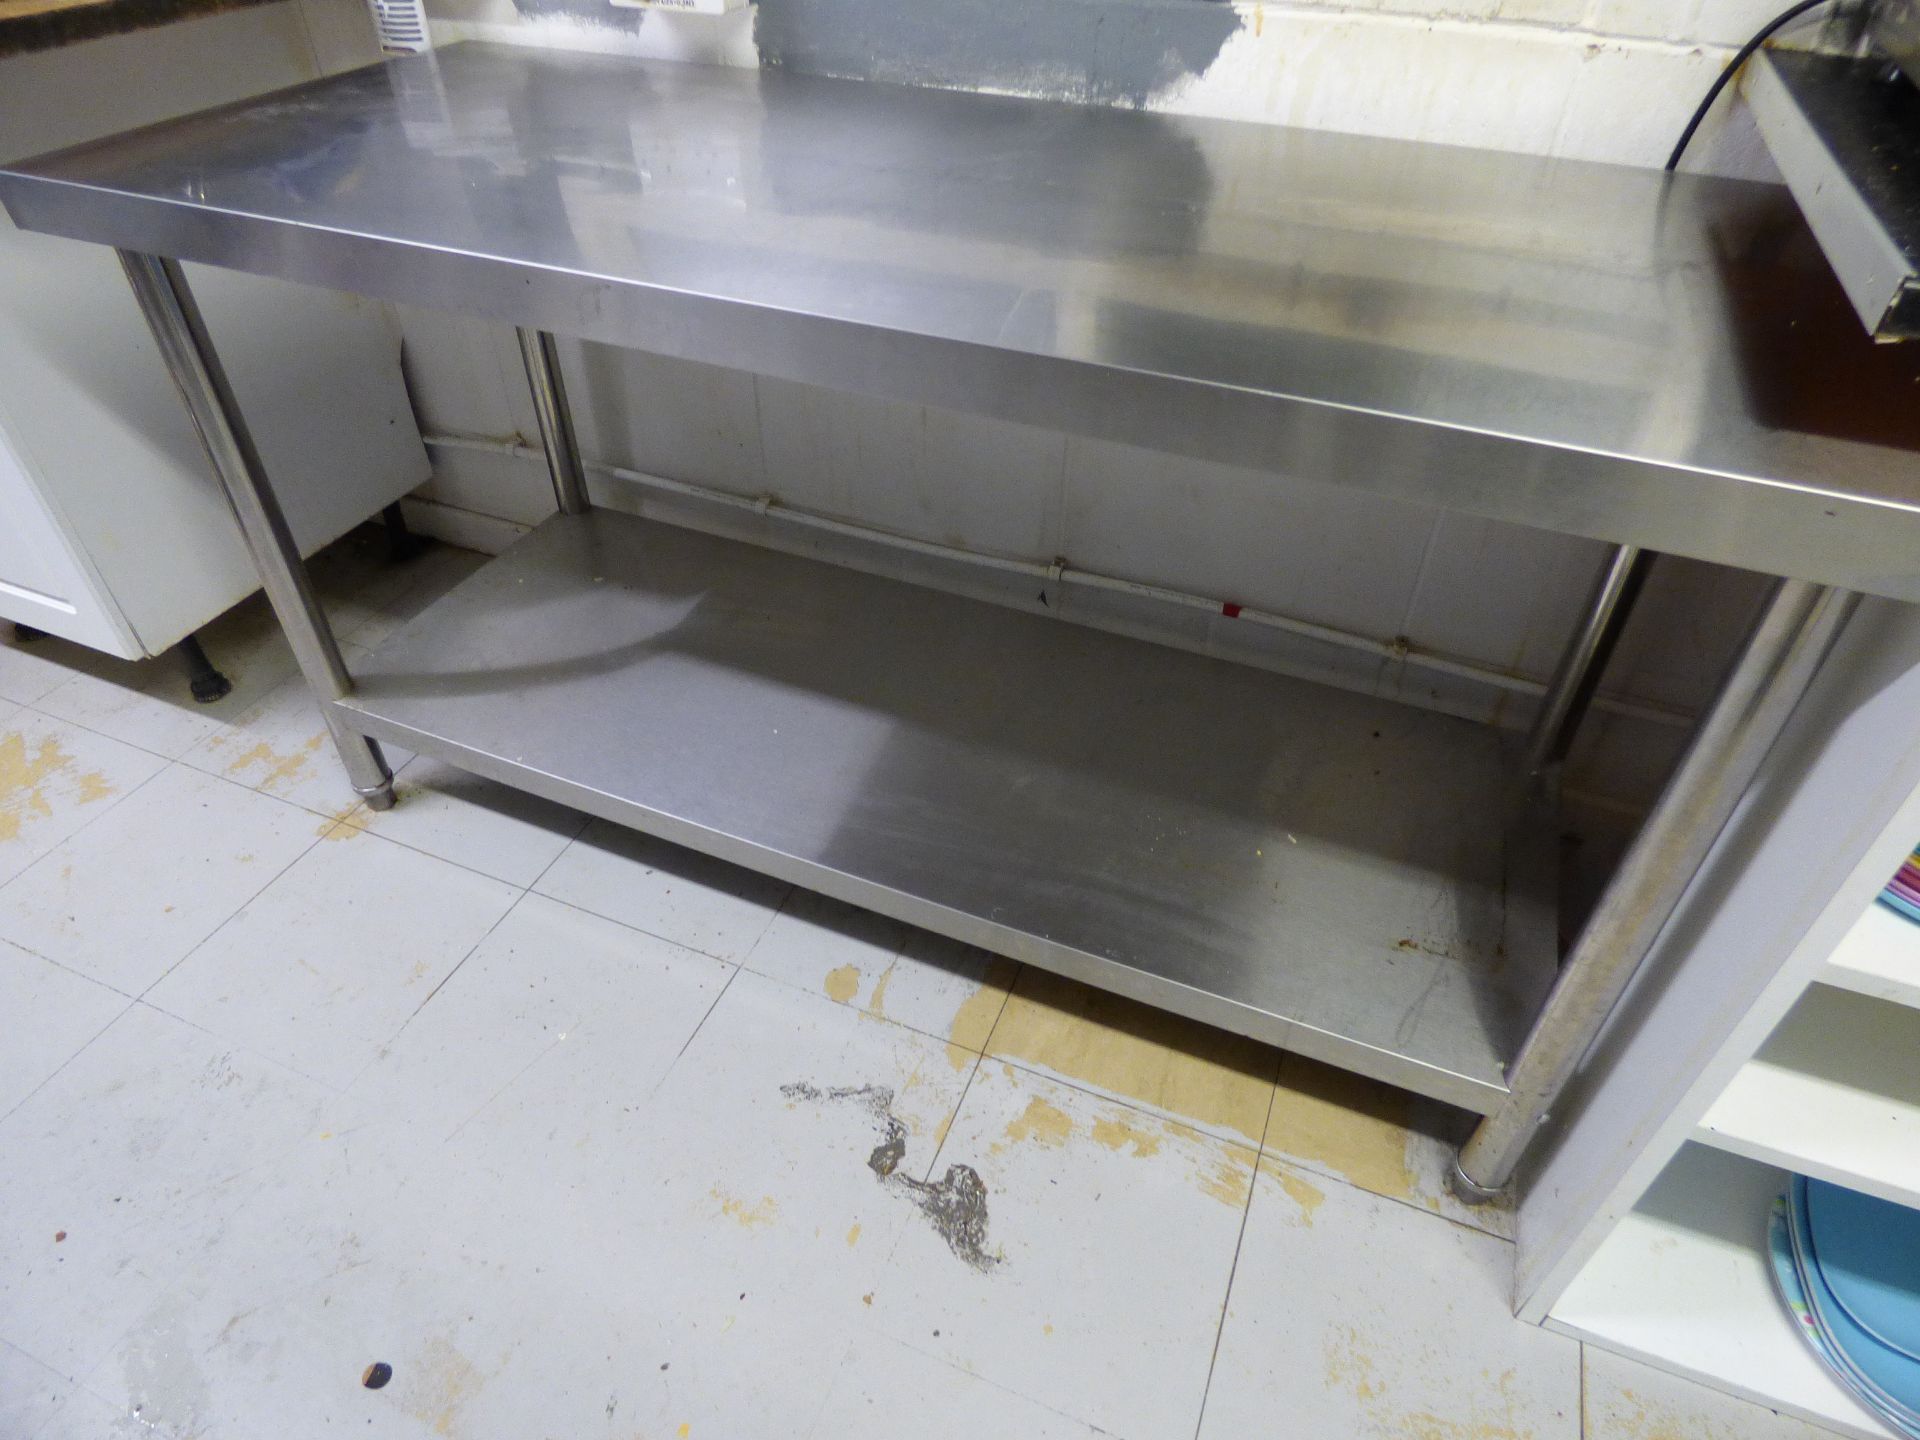 Stainless Steel Work Surface/Shelf Unit - Image 5 of 6